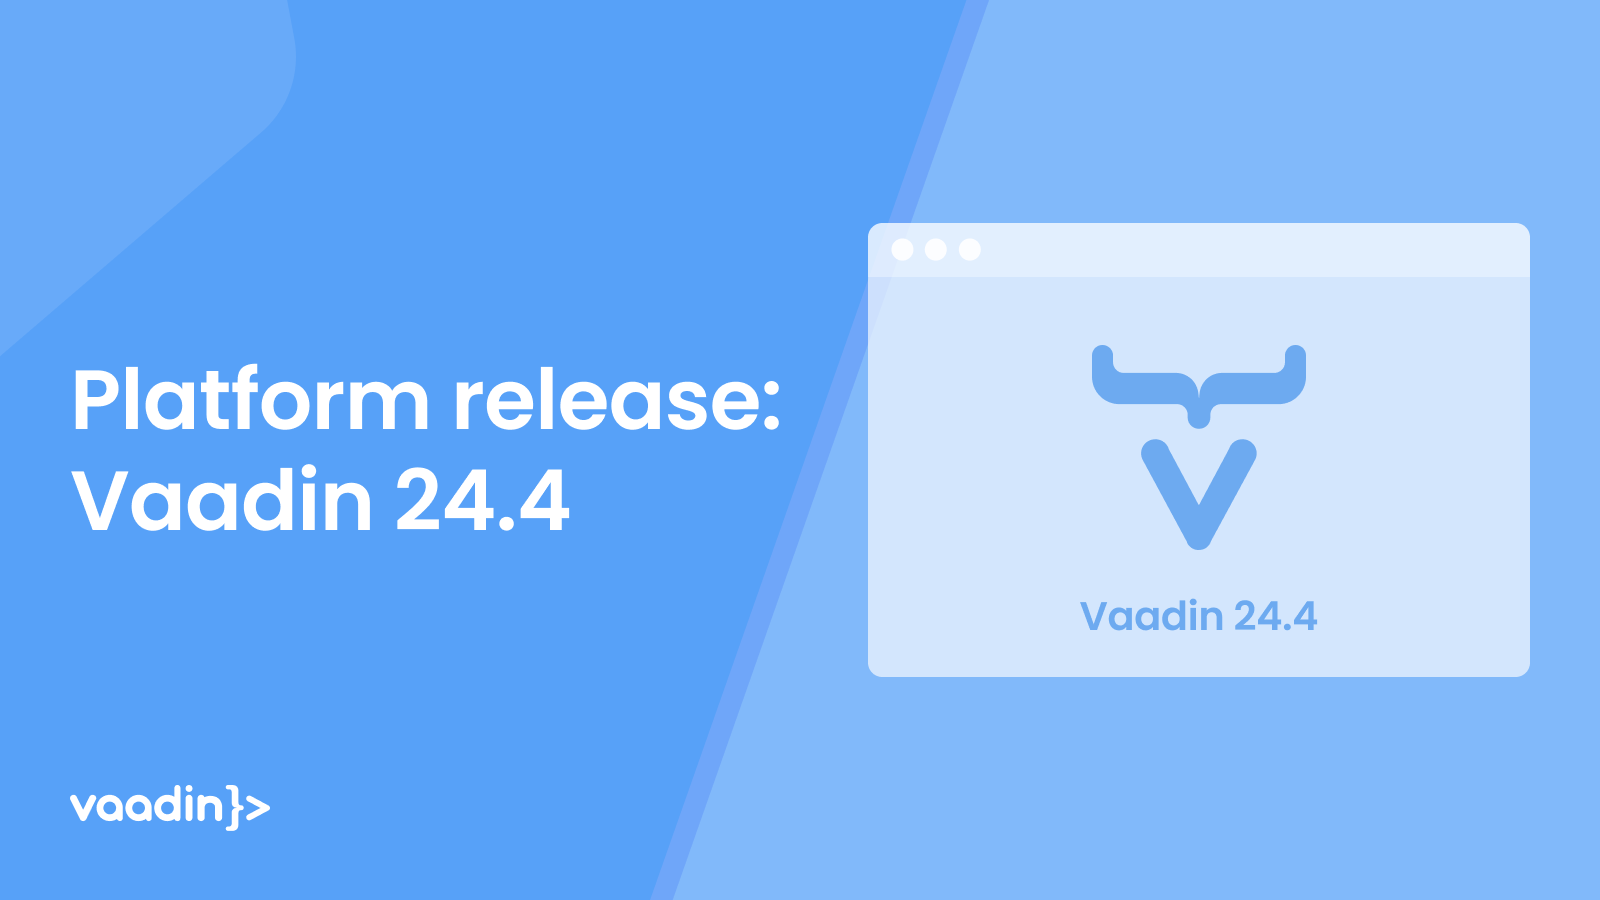 See what's new in Vaadin 24.4